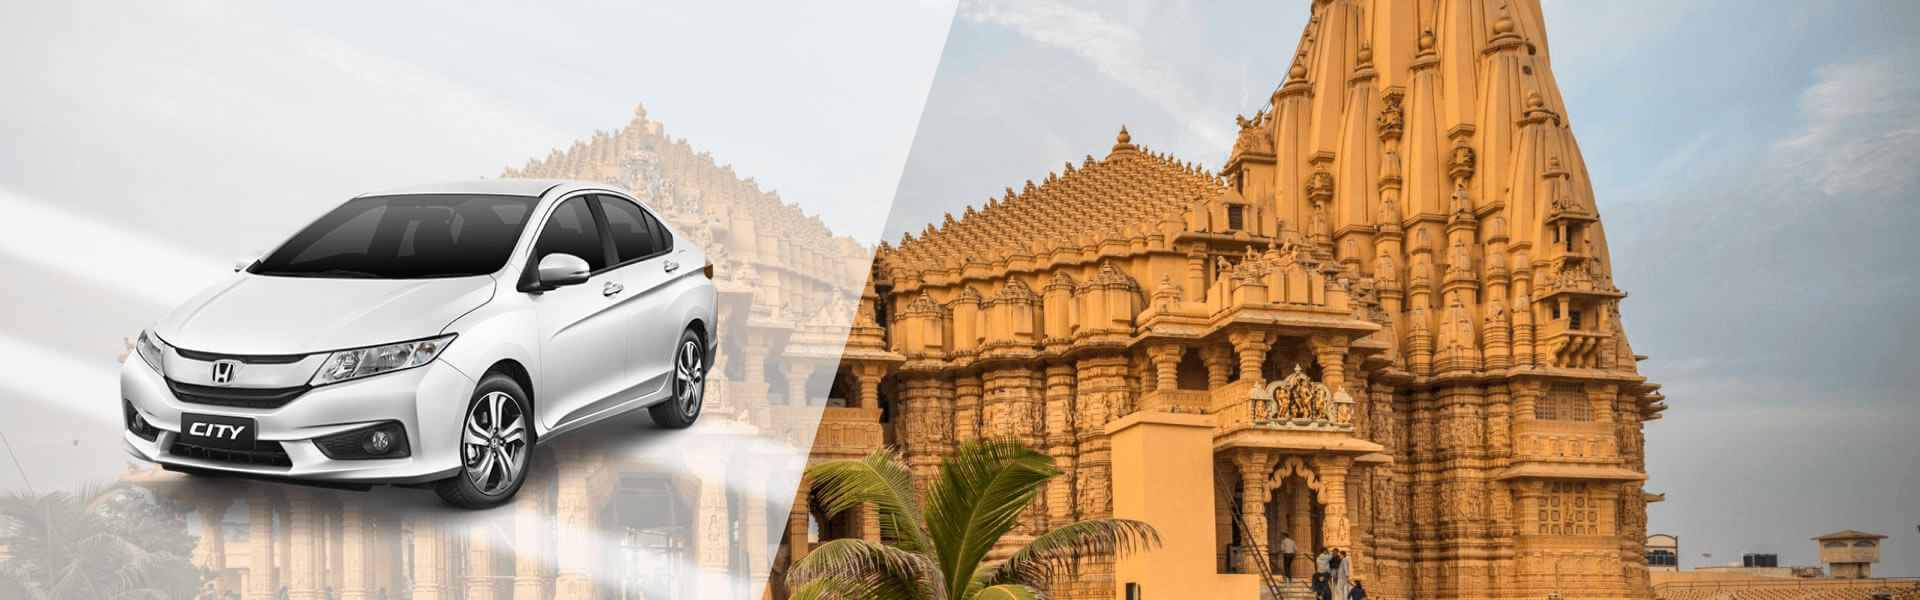 Ahmedabad to Somnath Cab Rental Services